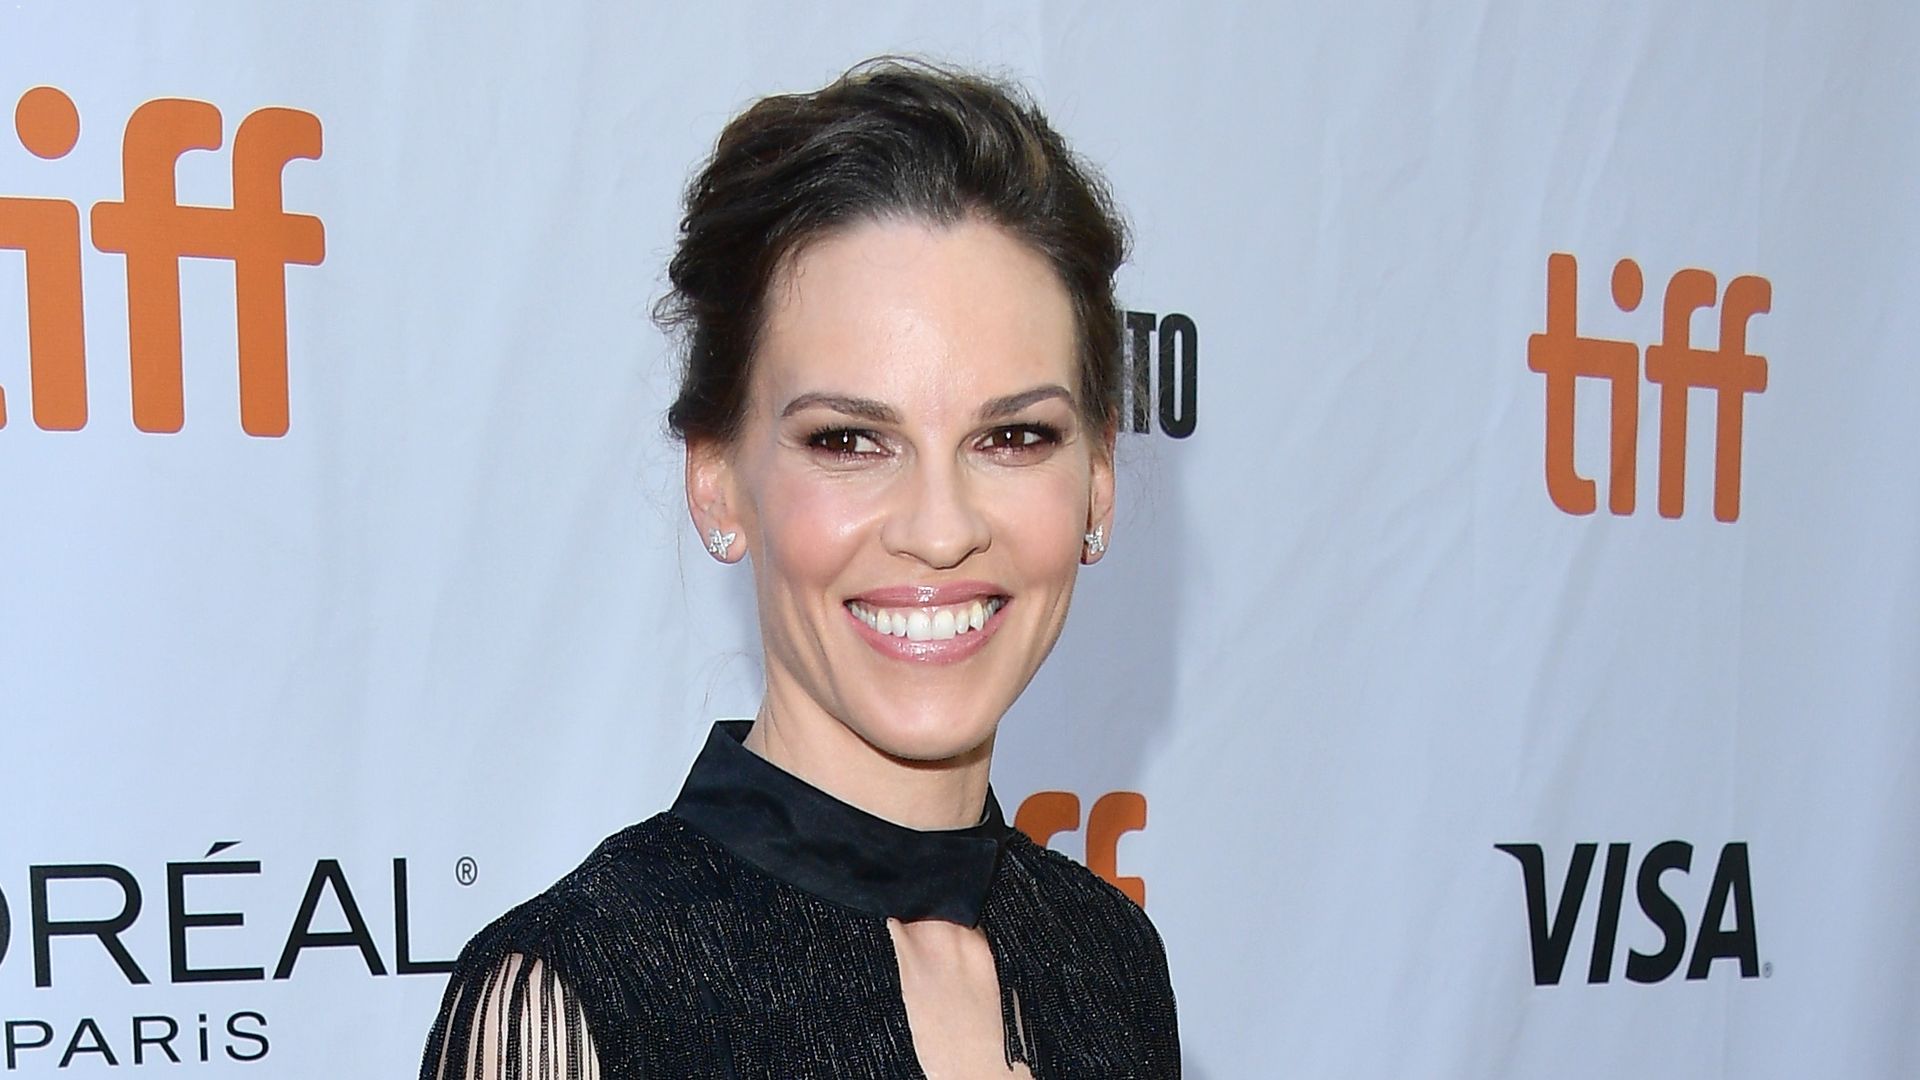 Hilary Swank attends the "What They Had" premiere during 2018 Toronto International Film Festival at Roy Thomson Hall on September 12, 2018 in Toronto, Canada. 